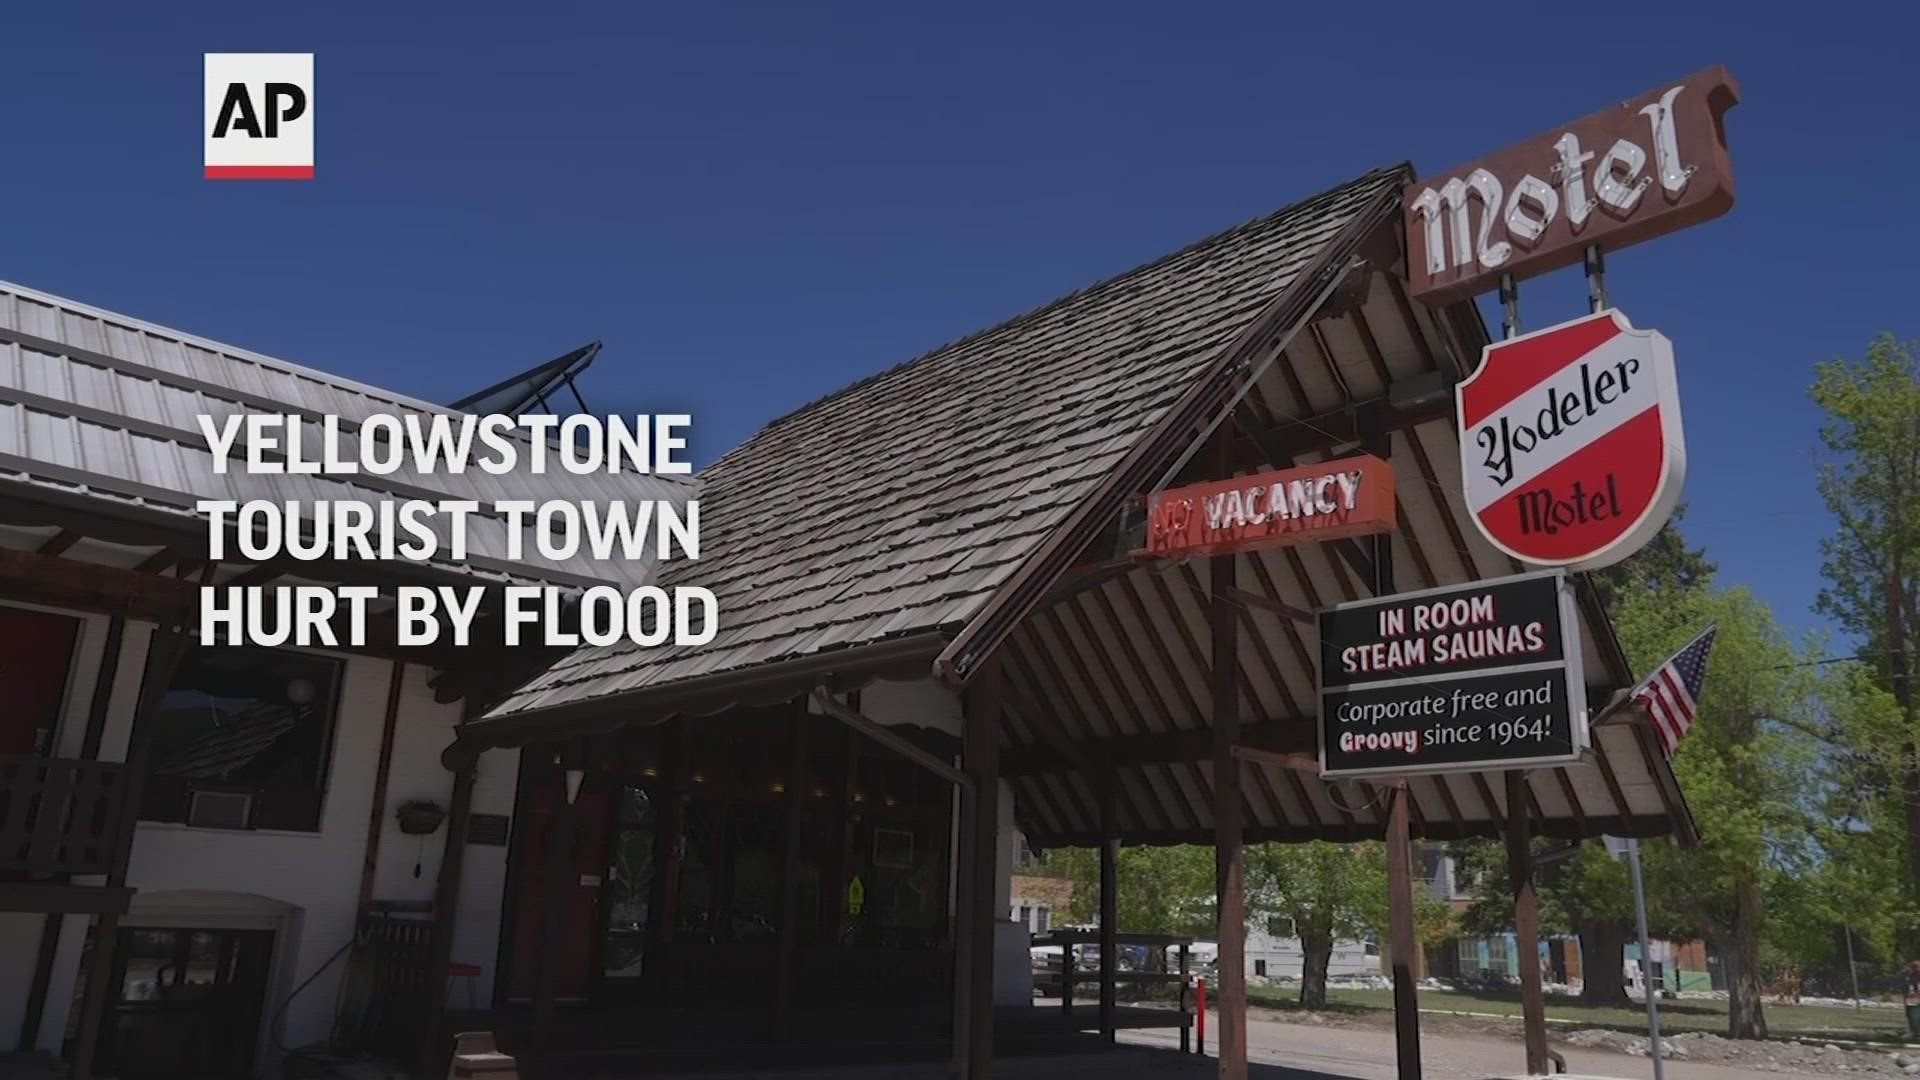 The severe flooding at Yellowstone National Park has left business owners in some of the park’s gateway towns wondering how they’ll make ends meet.